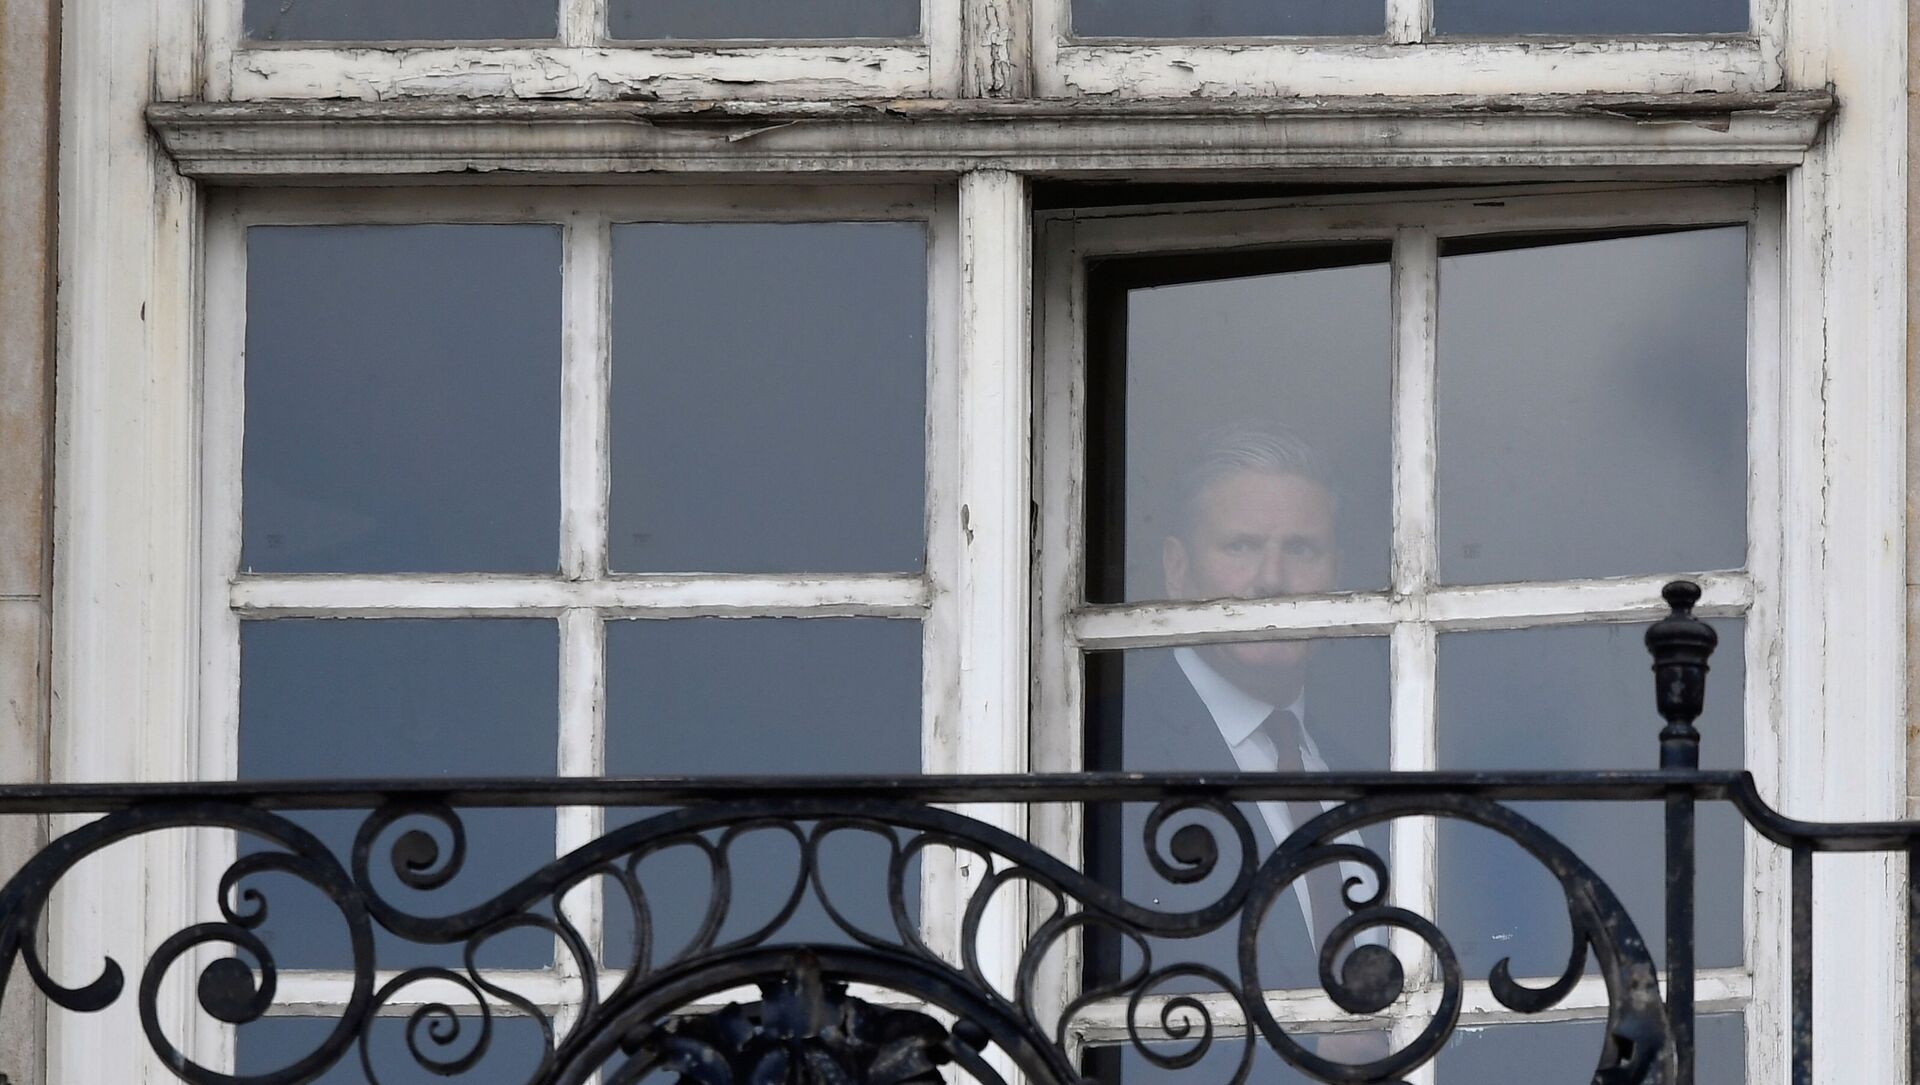 Britain's Labour Party leader Keir Starmer is seen in the window of his offices in London, Britain, May 7, 2021. REUTERS/Toby Melville - Sputnik International, 1920, 07.05.2021